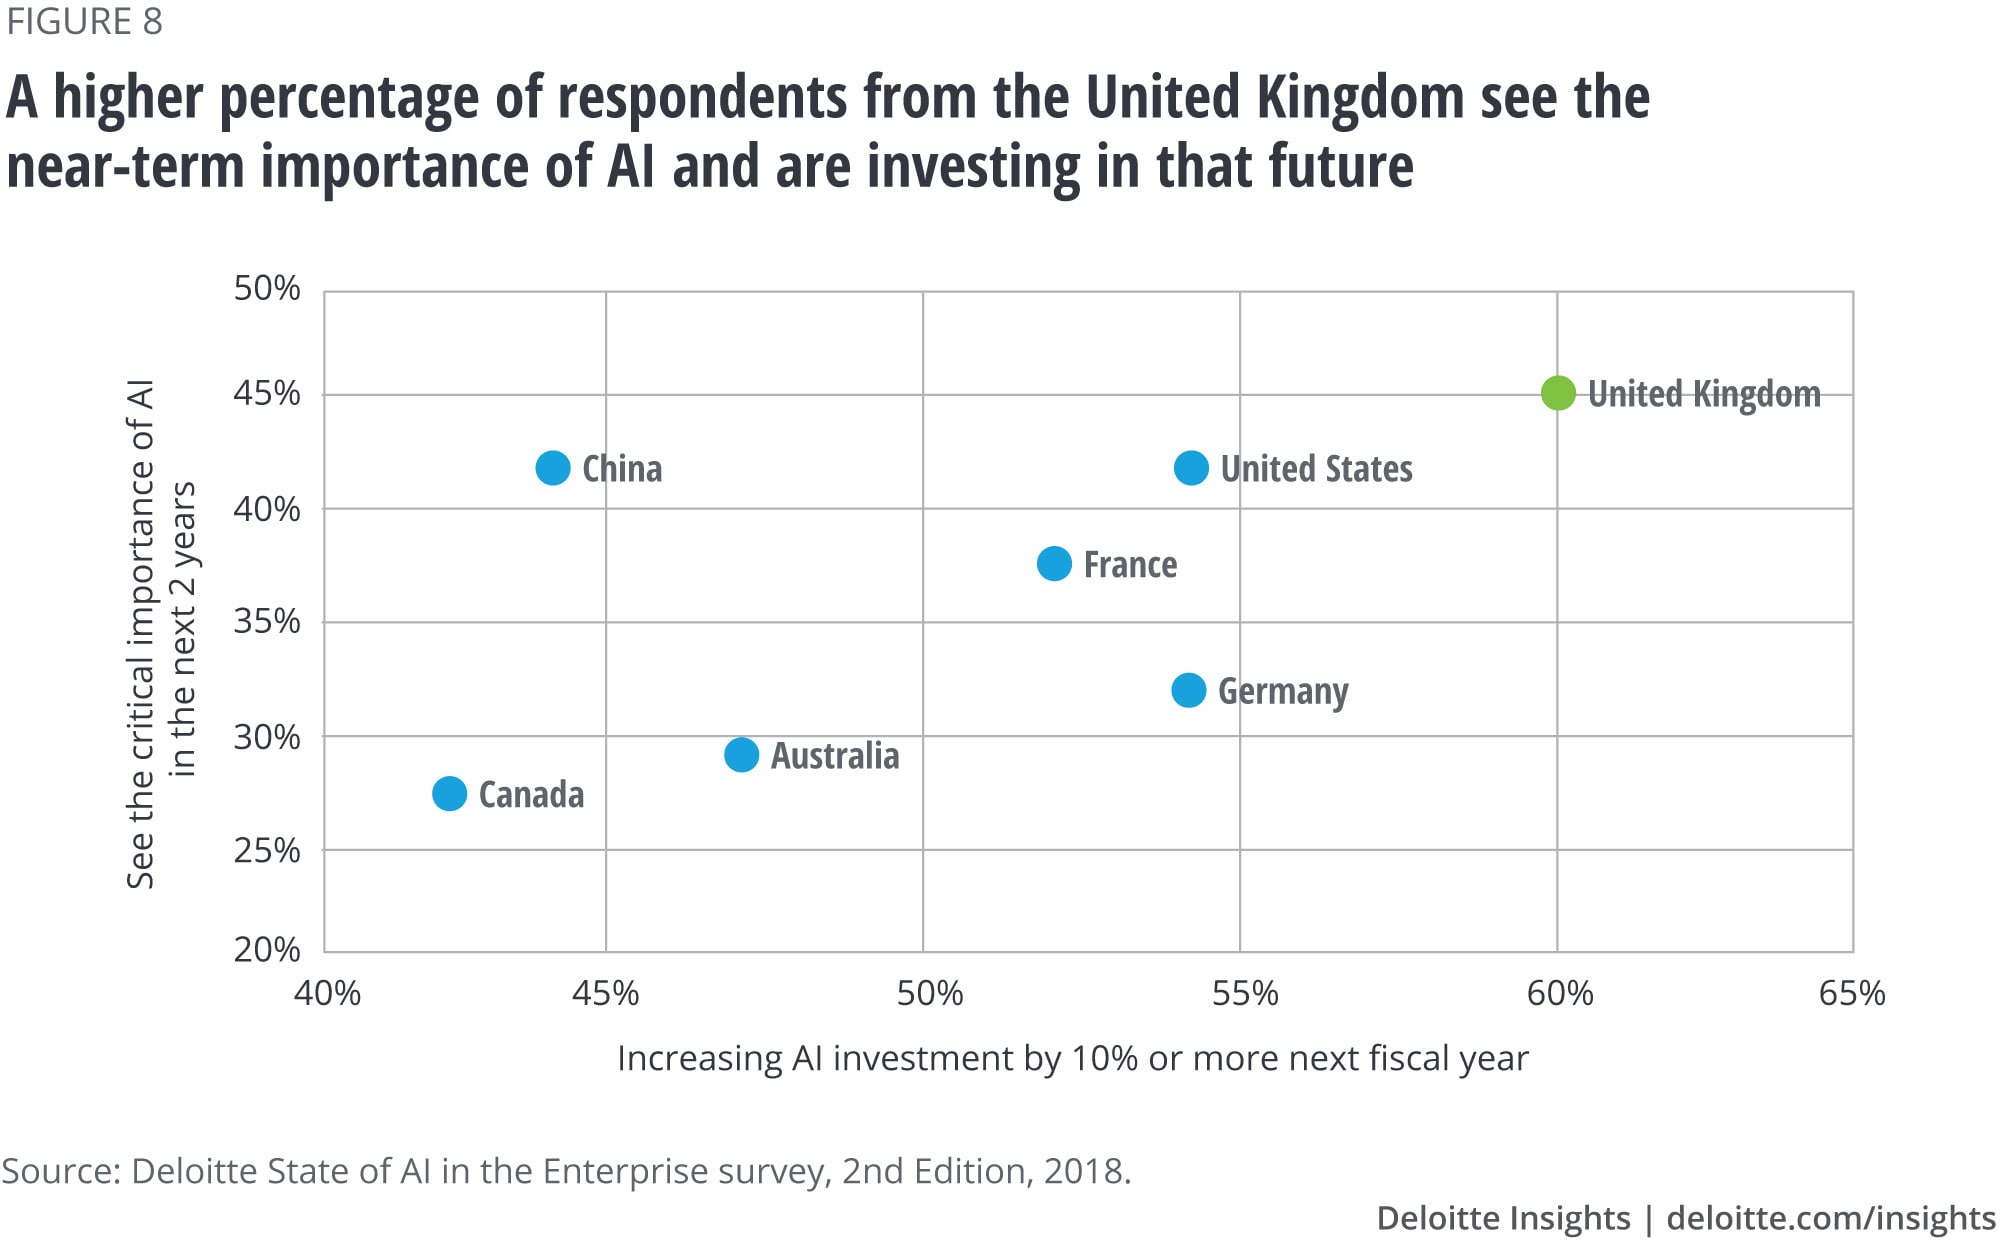 A higher percentage of respondents from the United Kingdom see the near-term importance of AI and are investing in that future